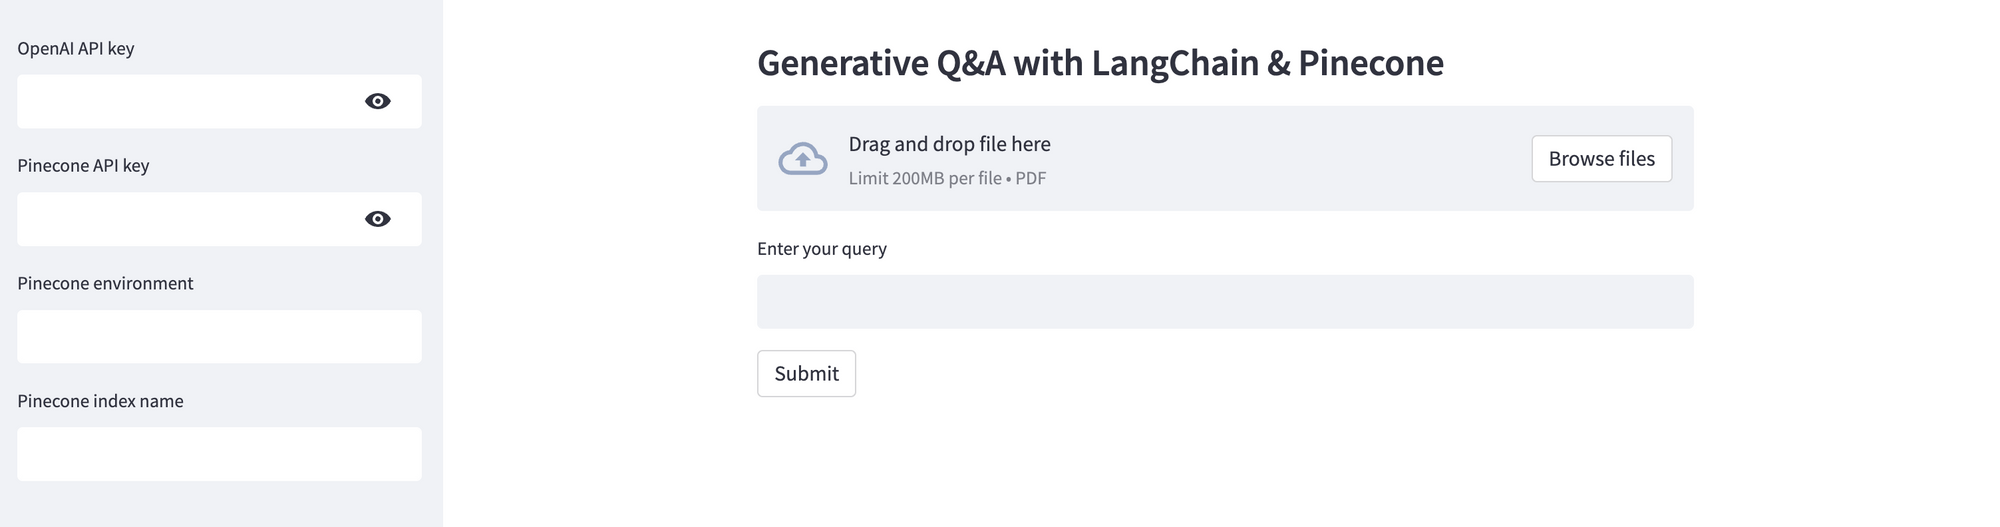 Generative question-answering with LangChain and Pinecone